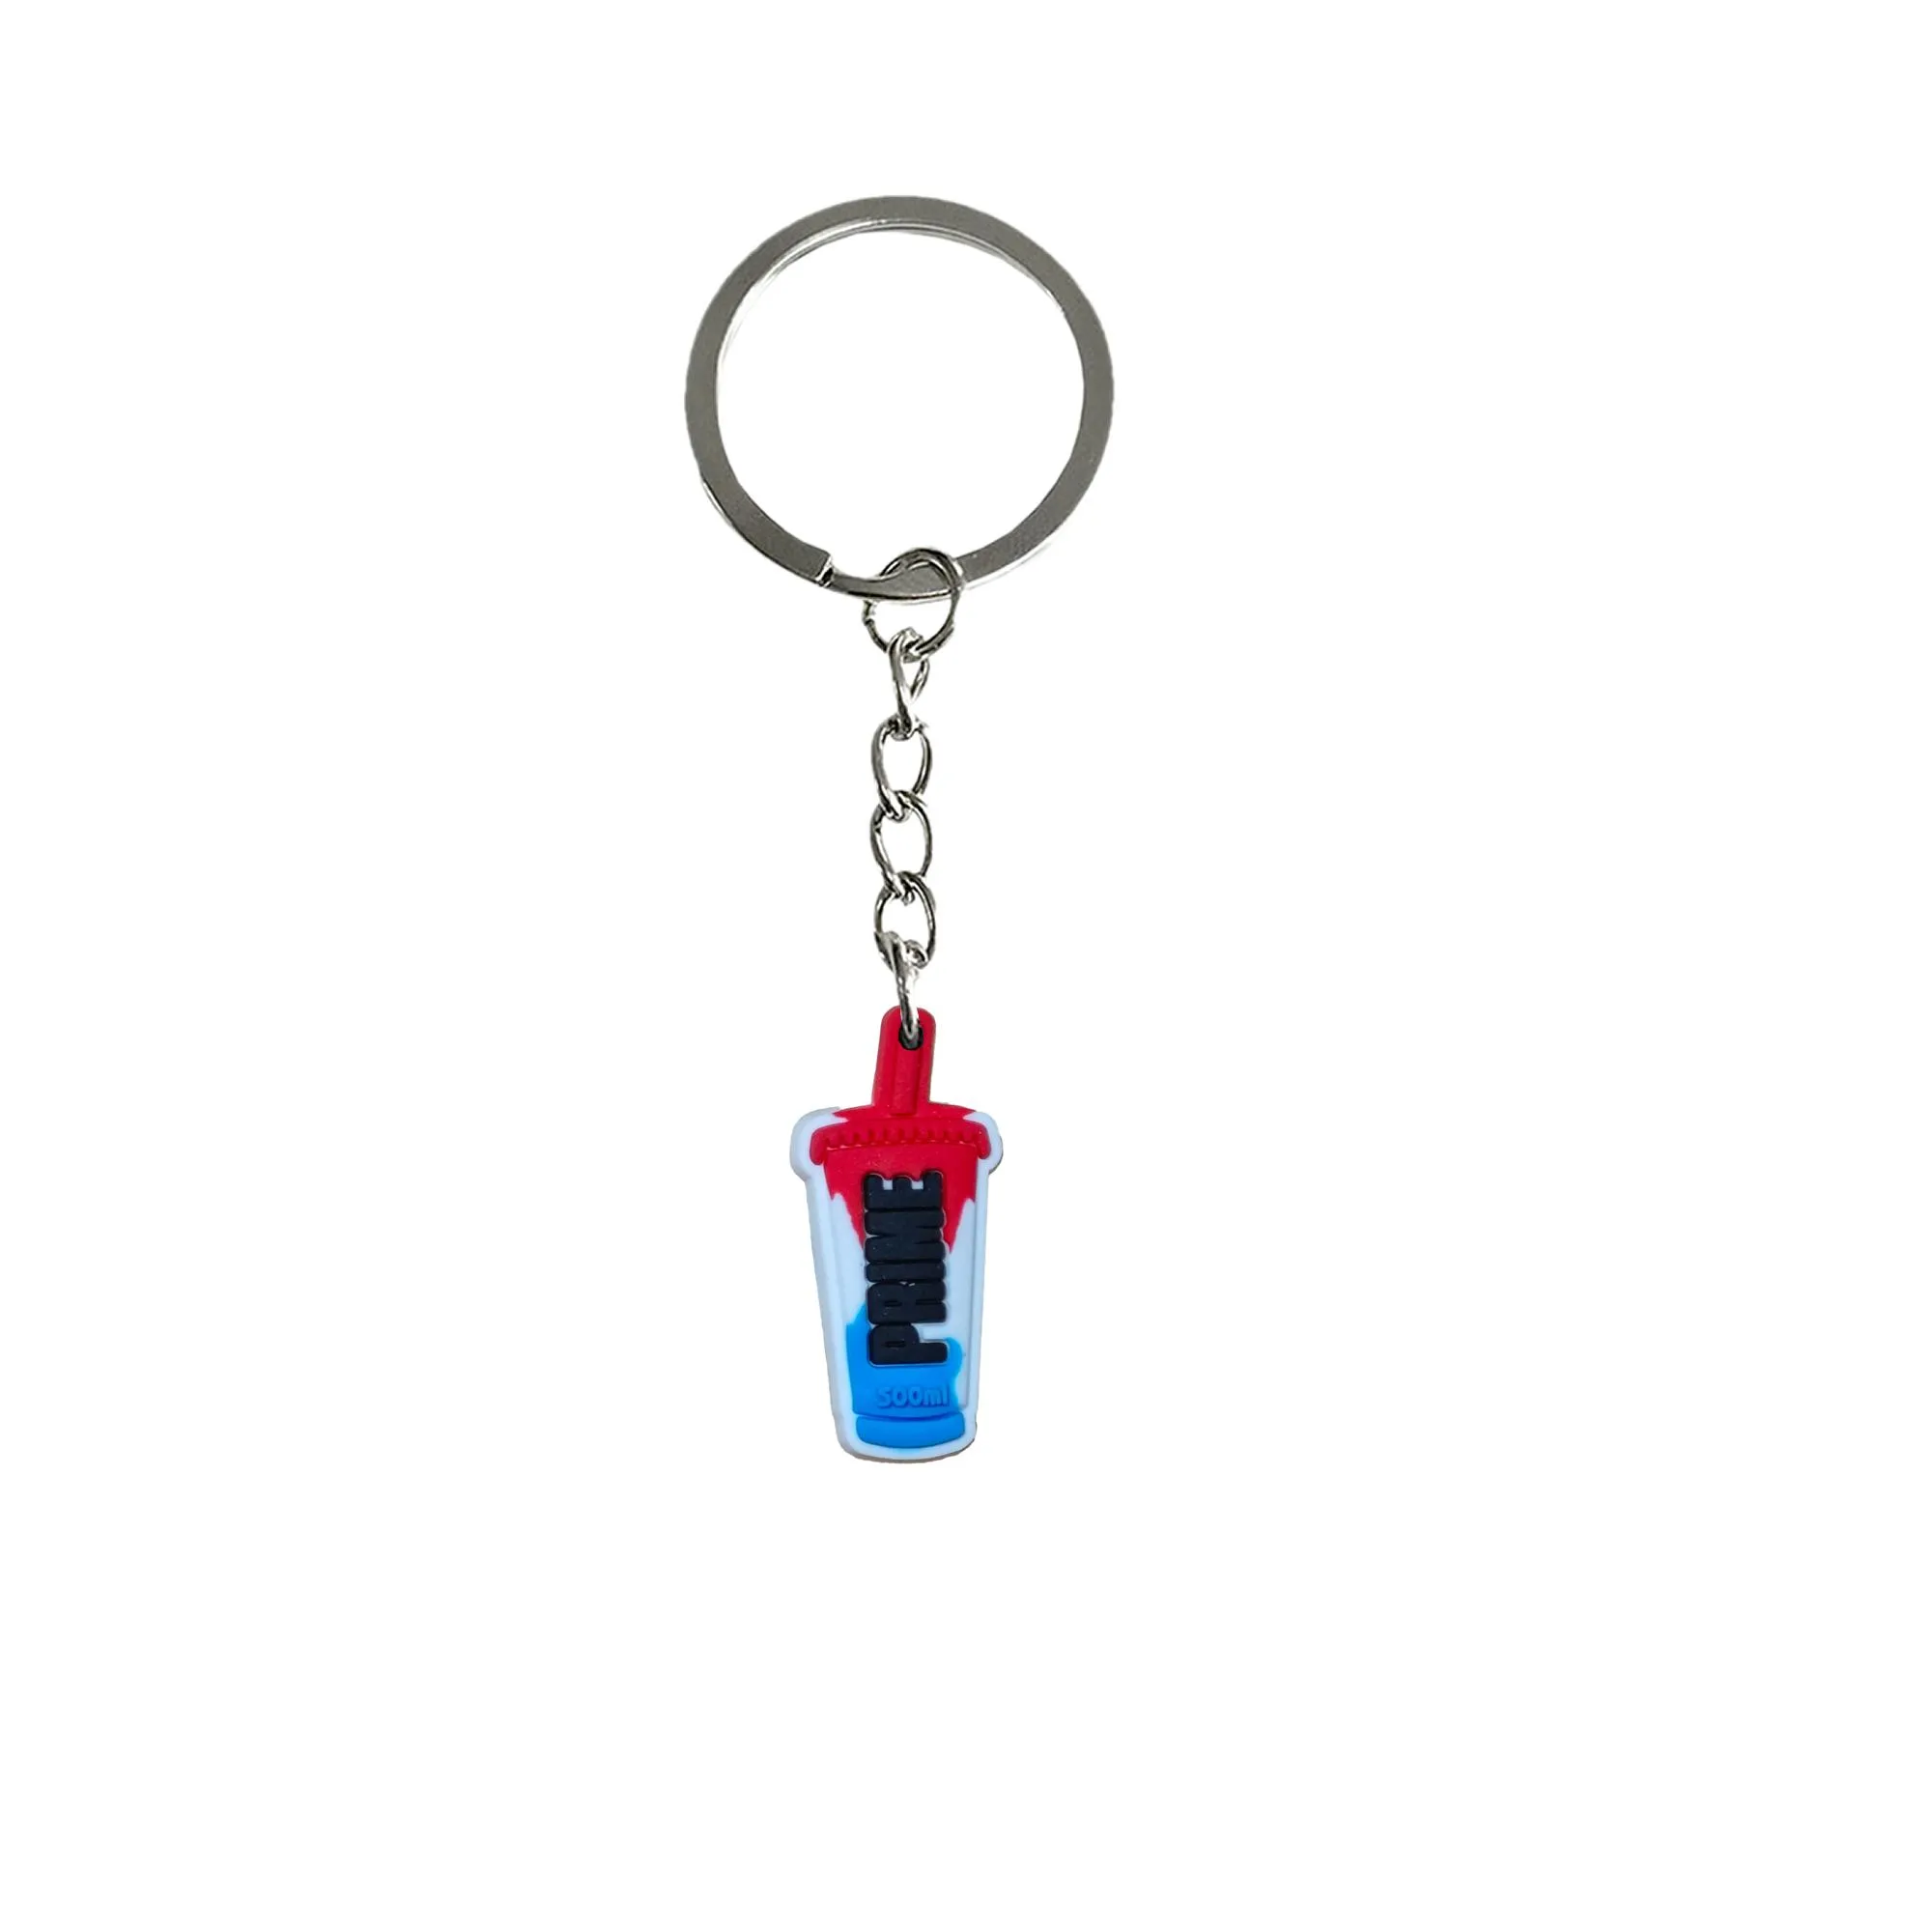 prime bottle keychain keyring for classroom school day birthday party supplies gift keychains boys pendants accessories kids favors suitable schoolbag key chain girls women